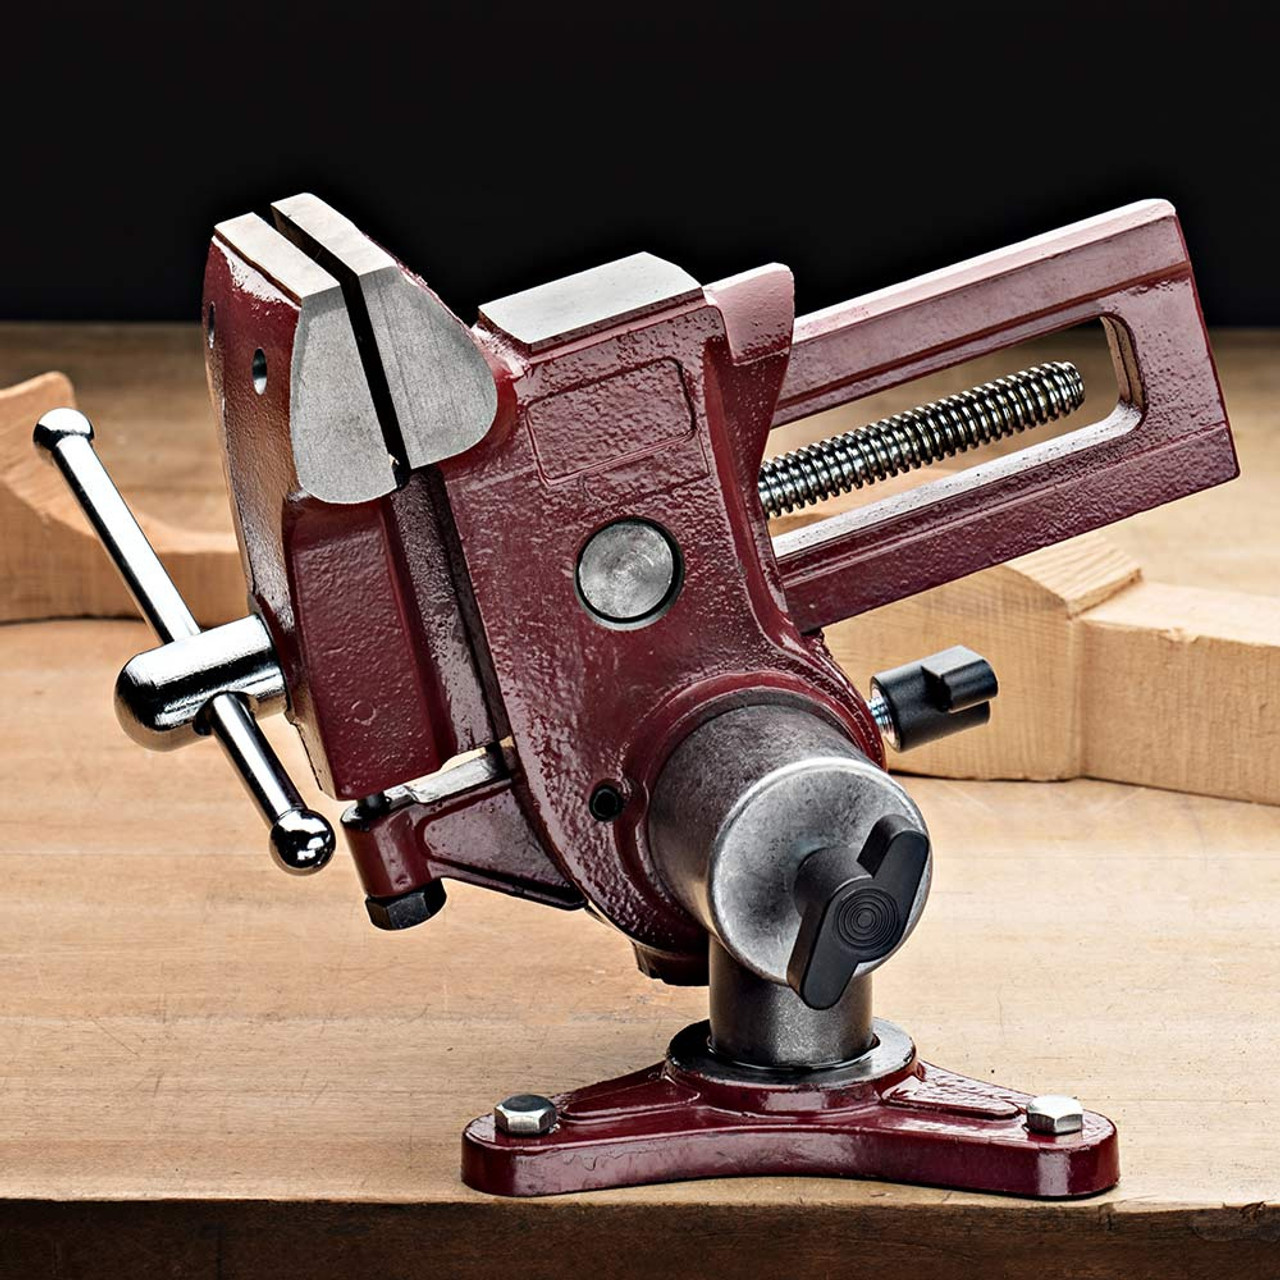 Bench Vise Heavy Duty Work Bench Table Vise Miniature Vise Wood Carving  Vise Blue Workbench All Steel Repair Tool To Rotate Pipe Vice Woodworking 